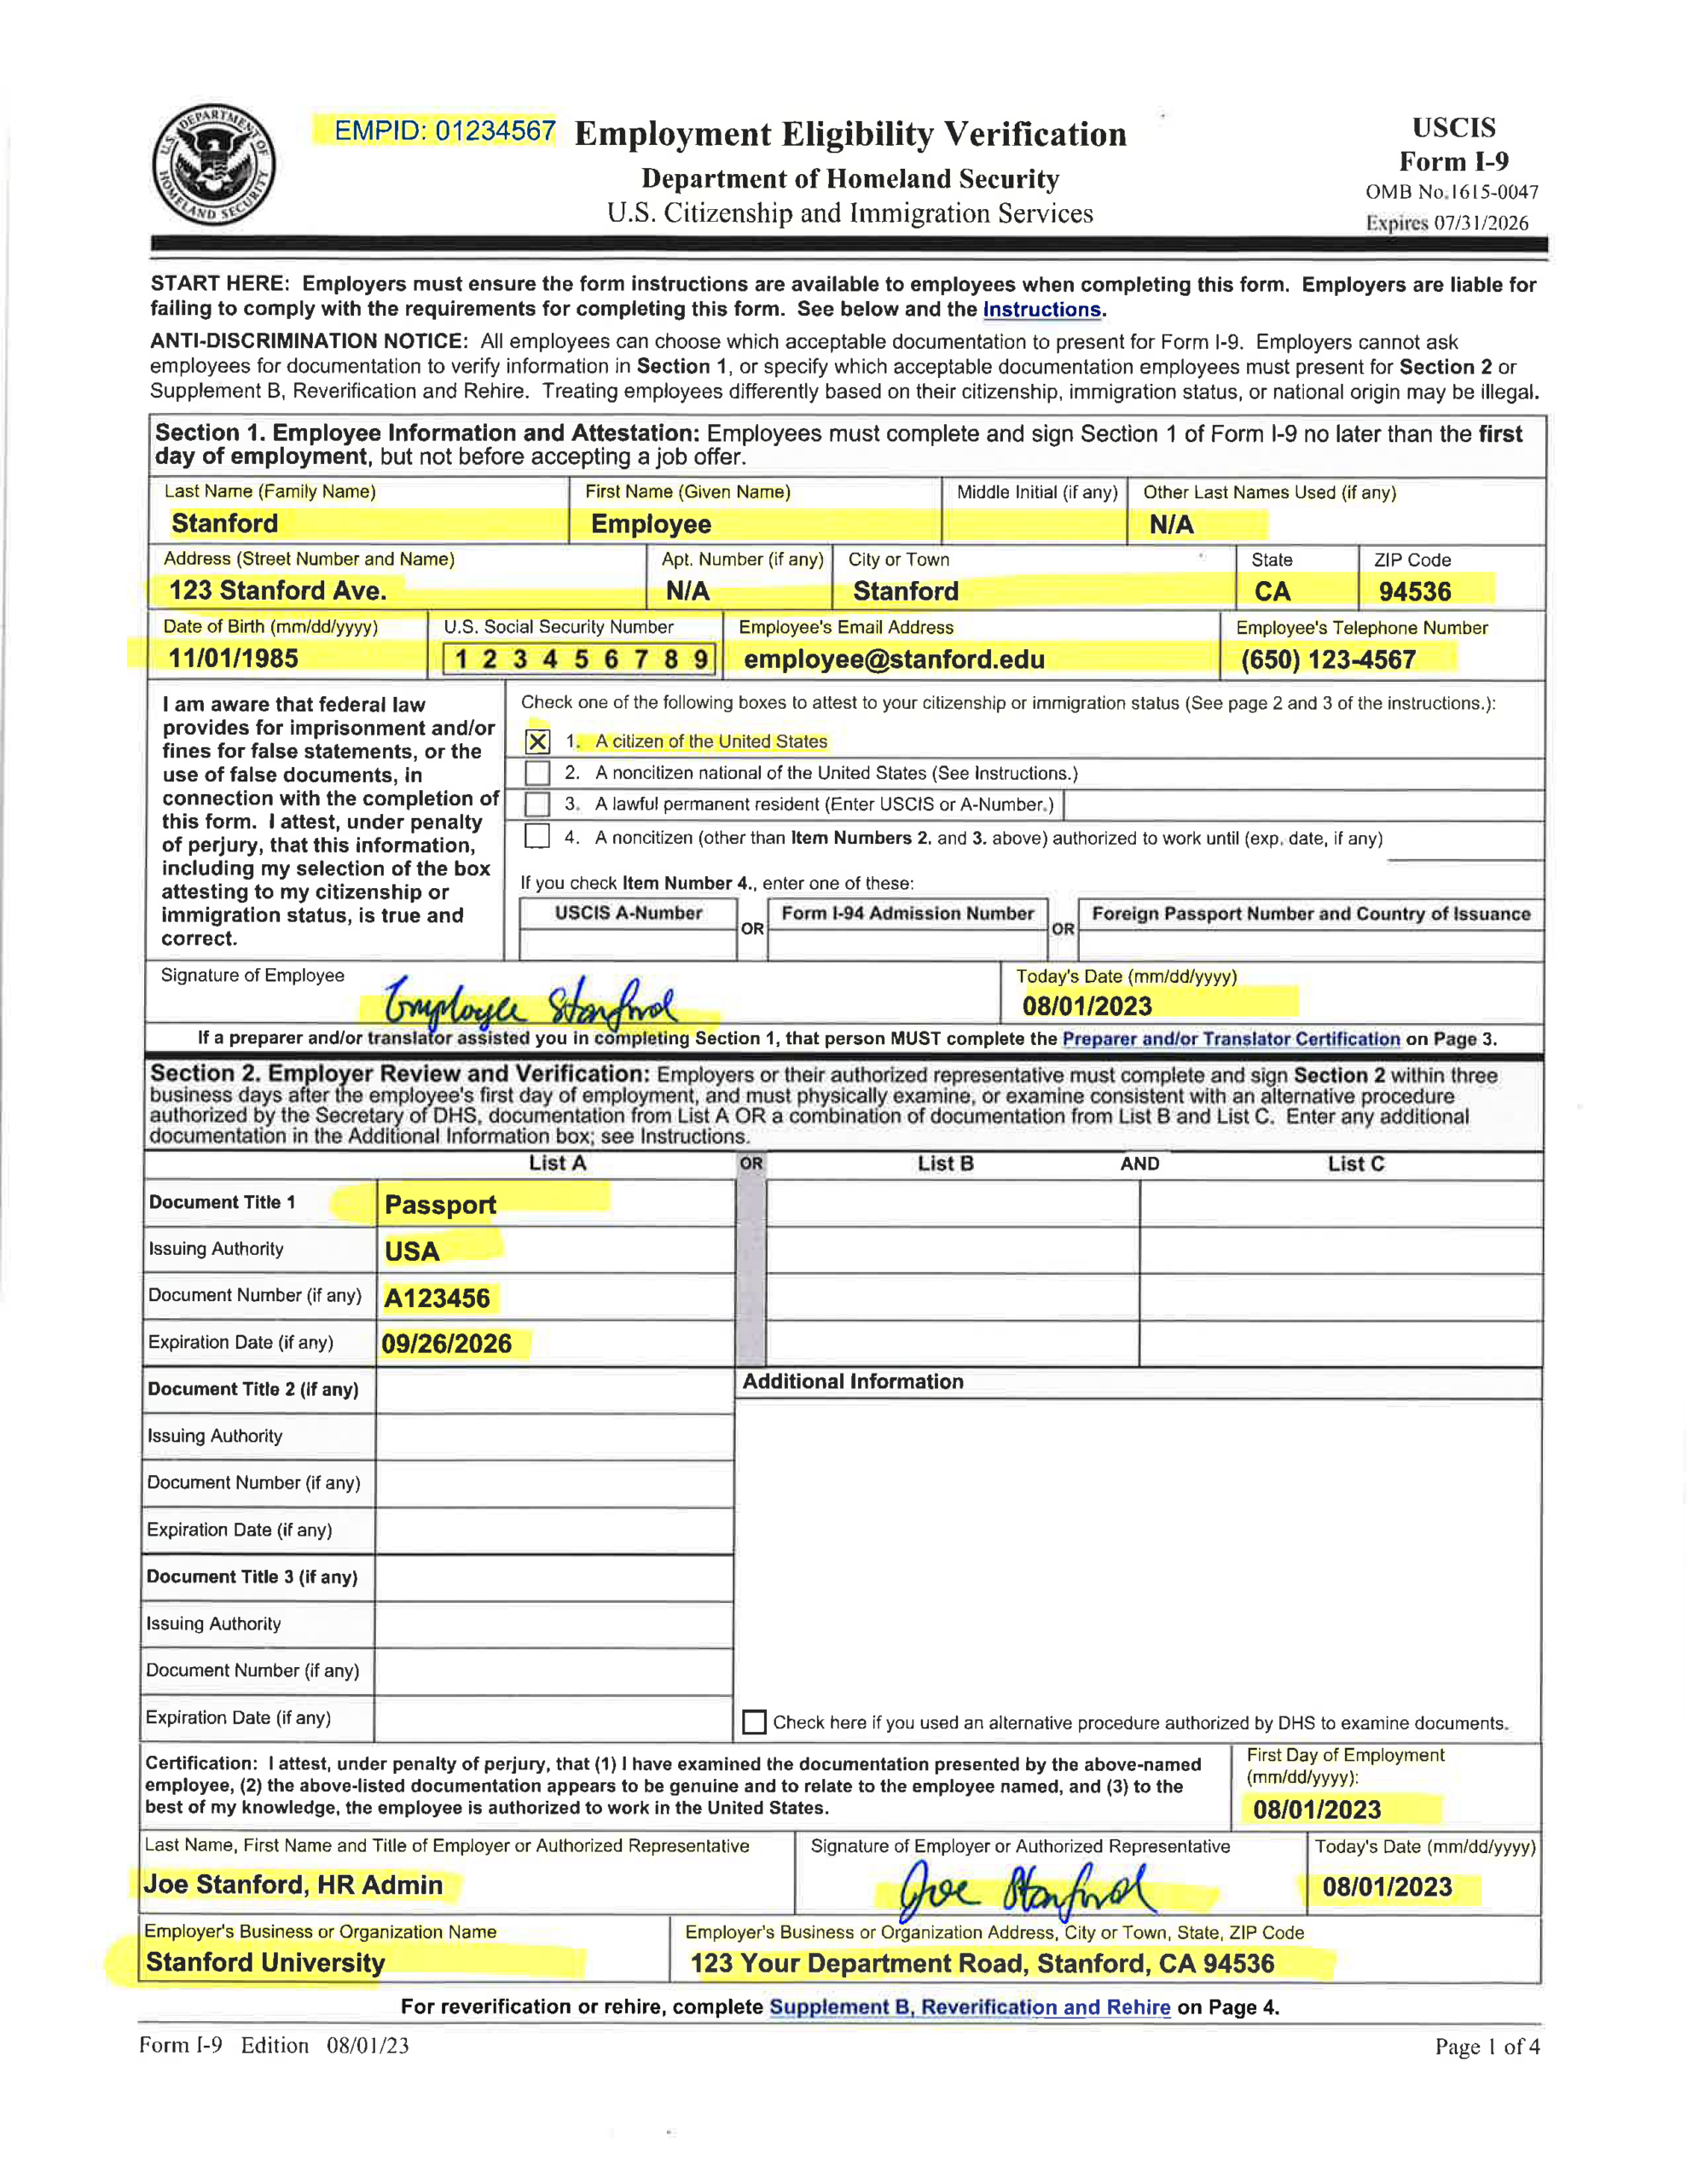 Examples Of Completed Form I-9 For Stanford regarding USCIS I-9 Form